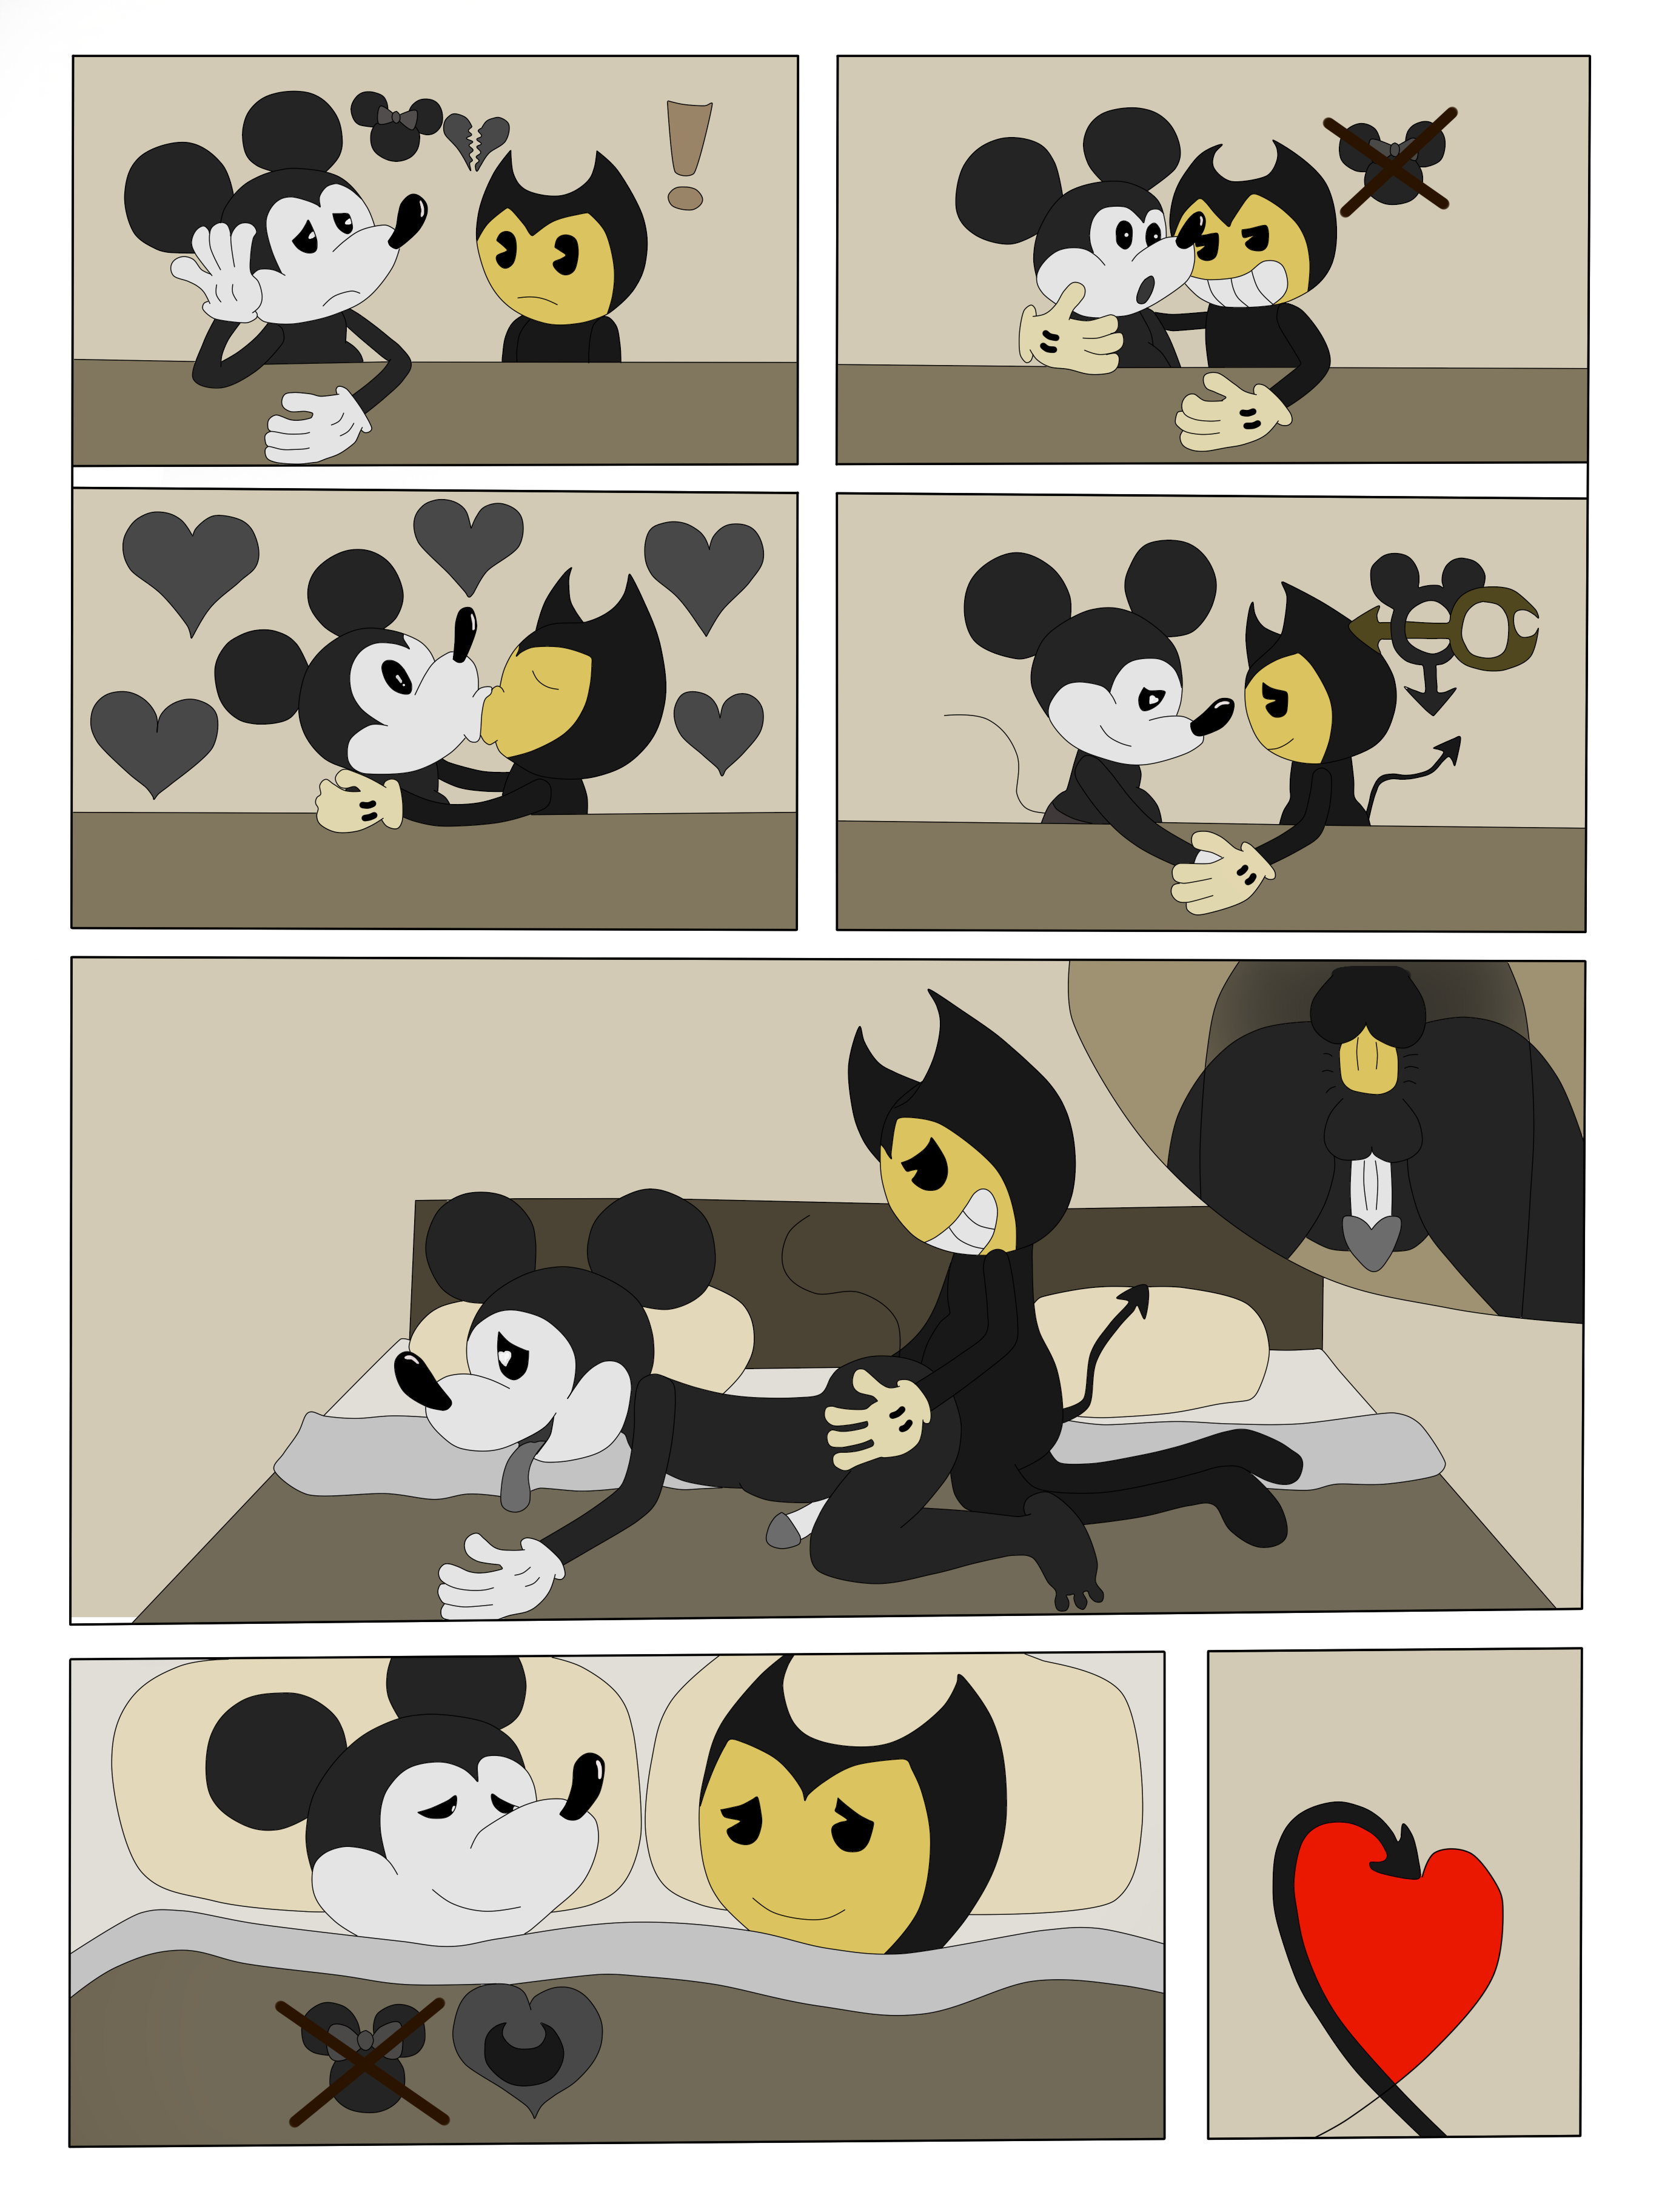 bendy, bendy the dancing demon, mickey mouse, bendy and the ink machine, di...